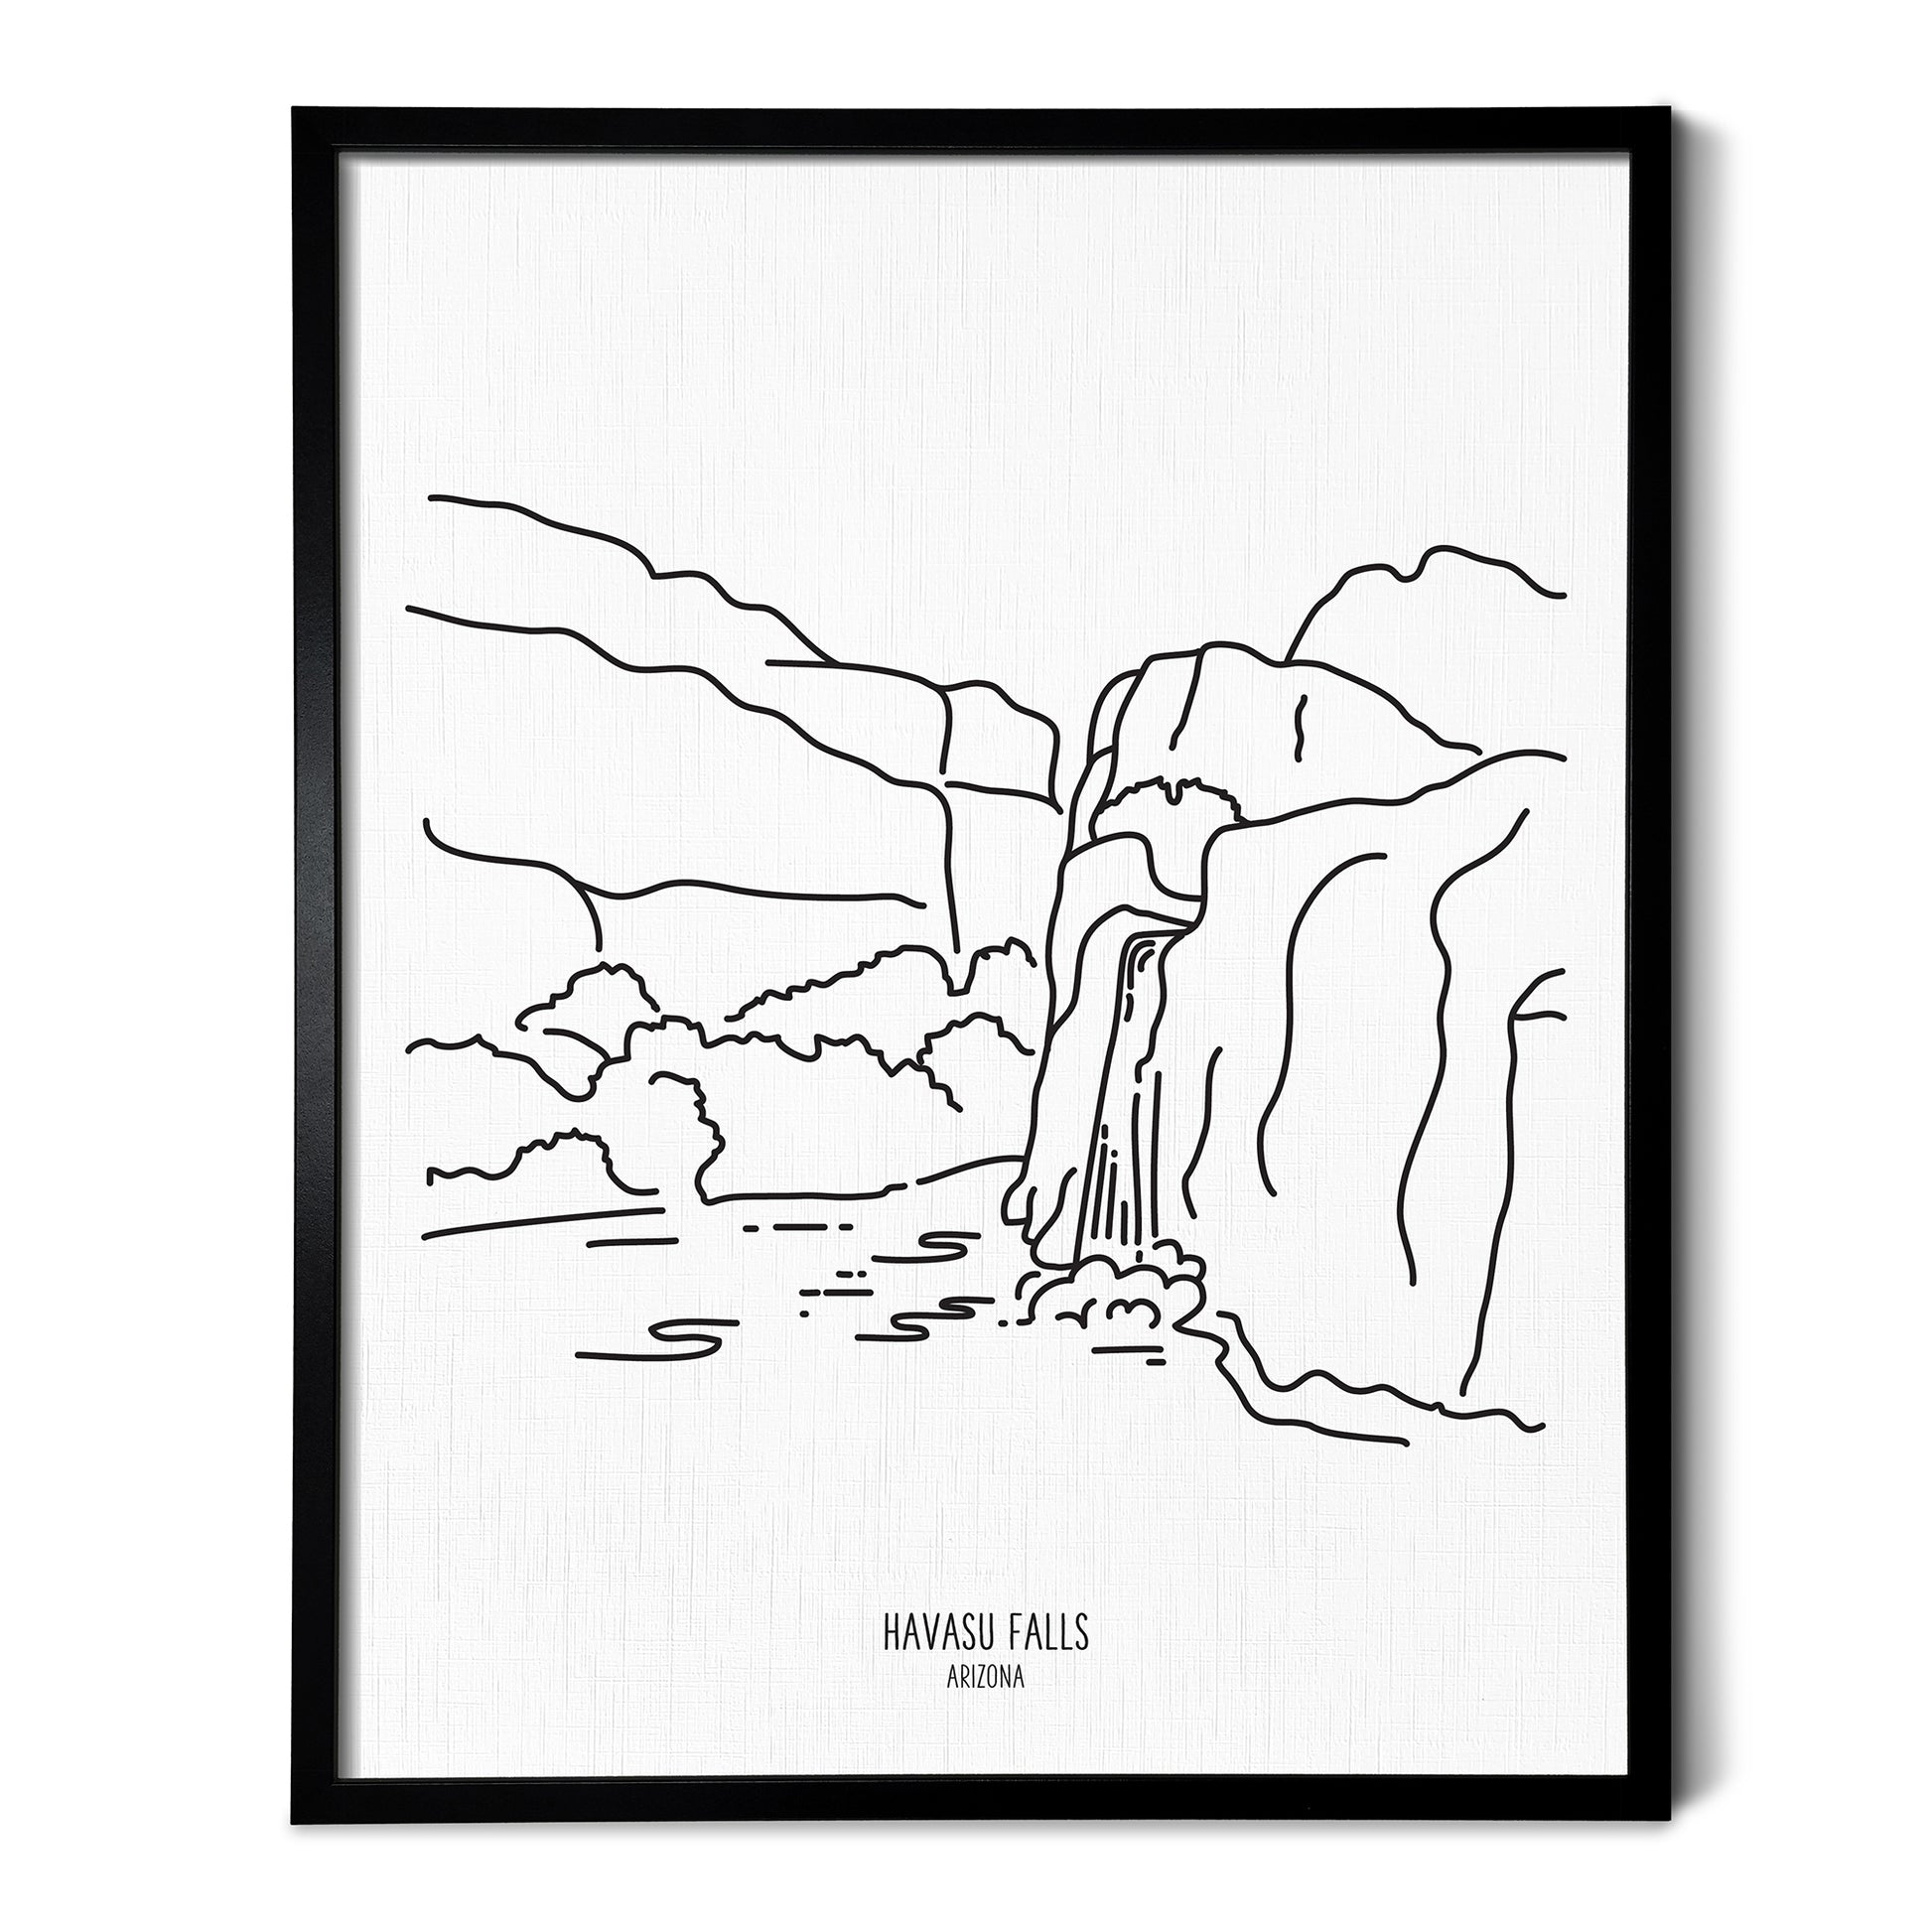 A line art drawing of Havasu Falls in Arizona on white linen paper in a thin black picture frame